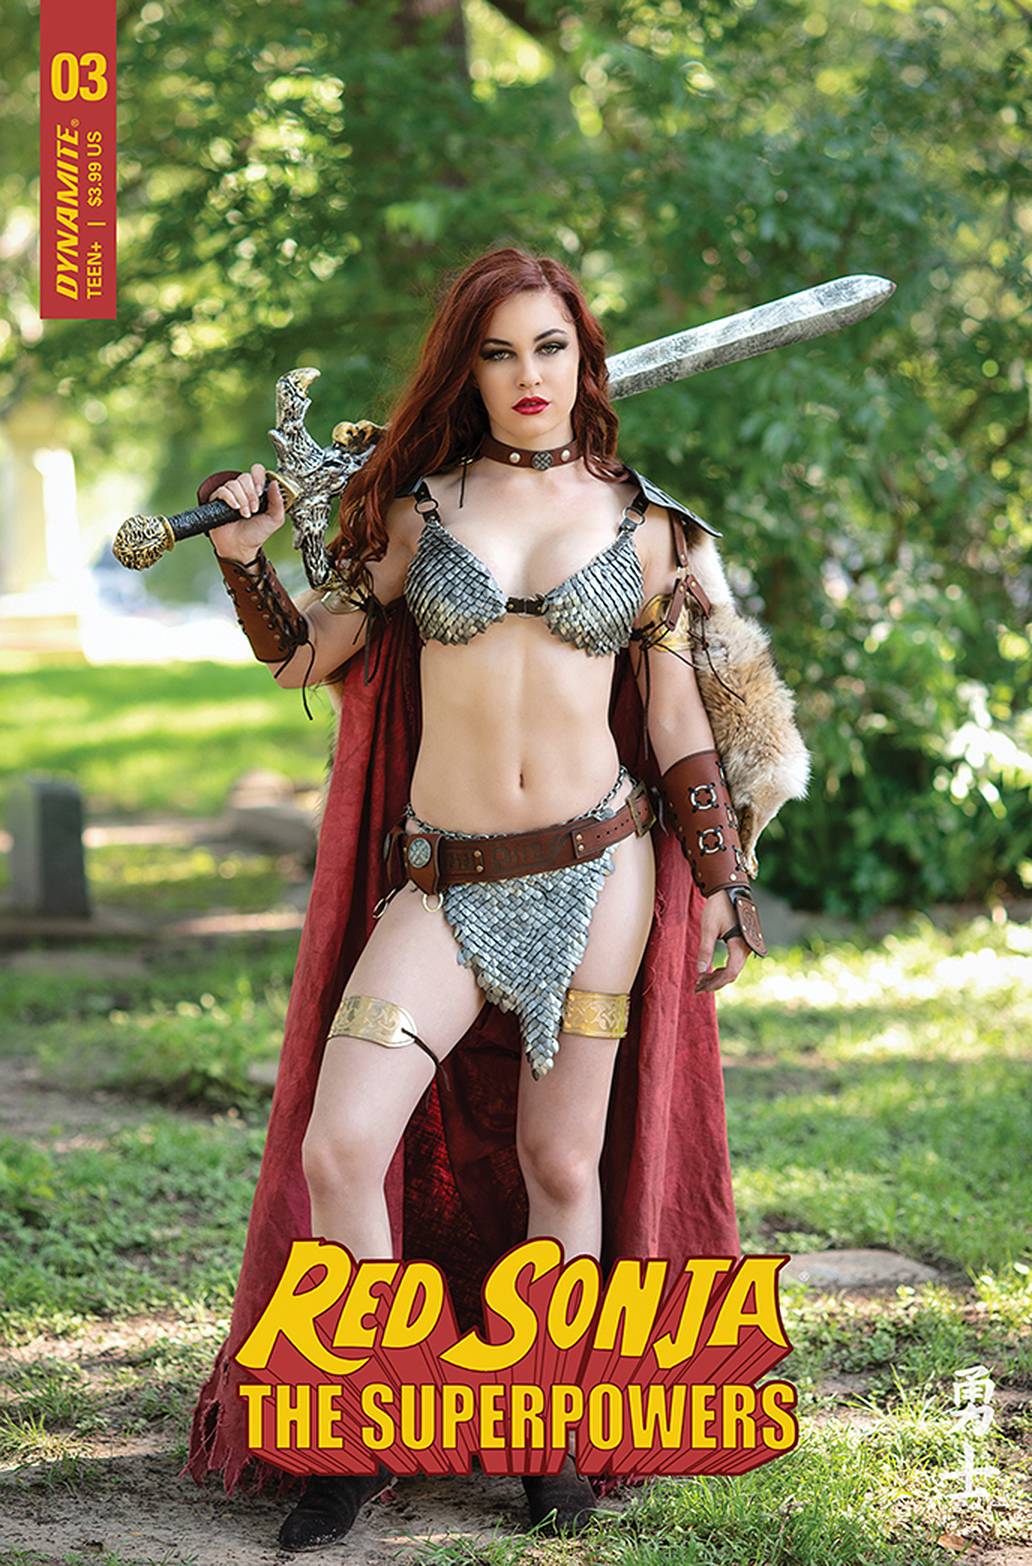 RED SONJA THE SUPERPOWERS